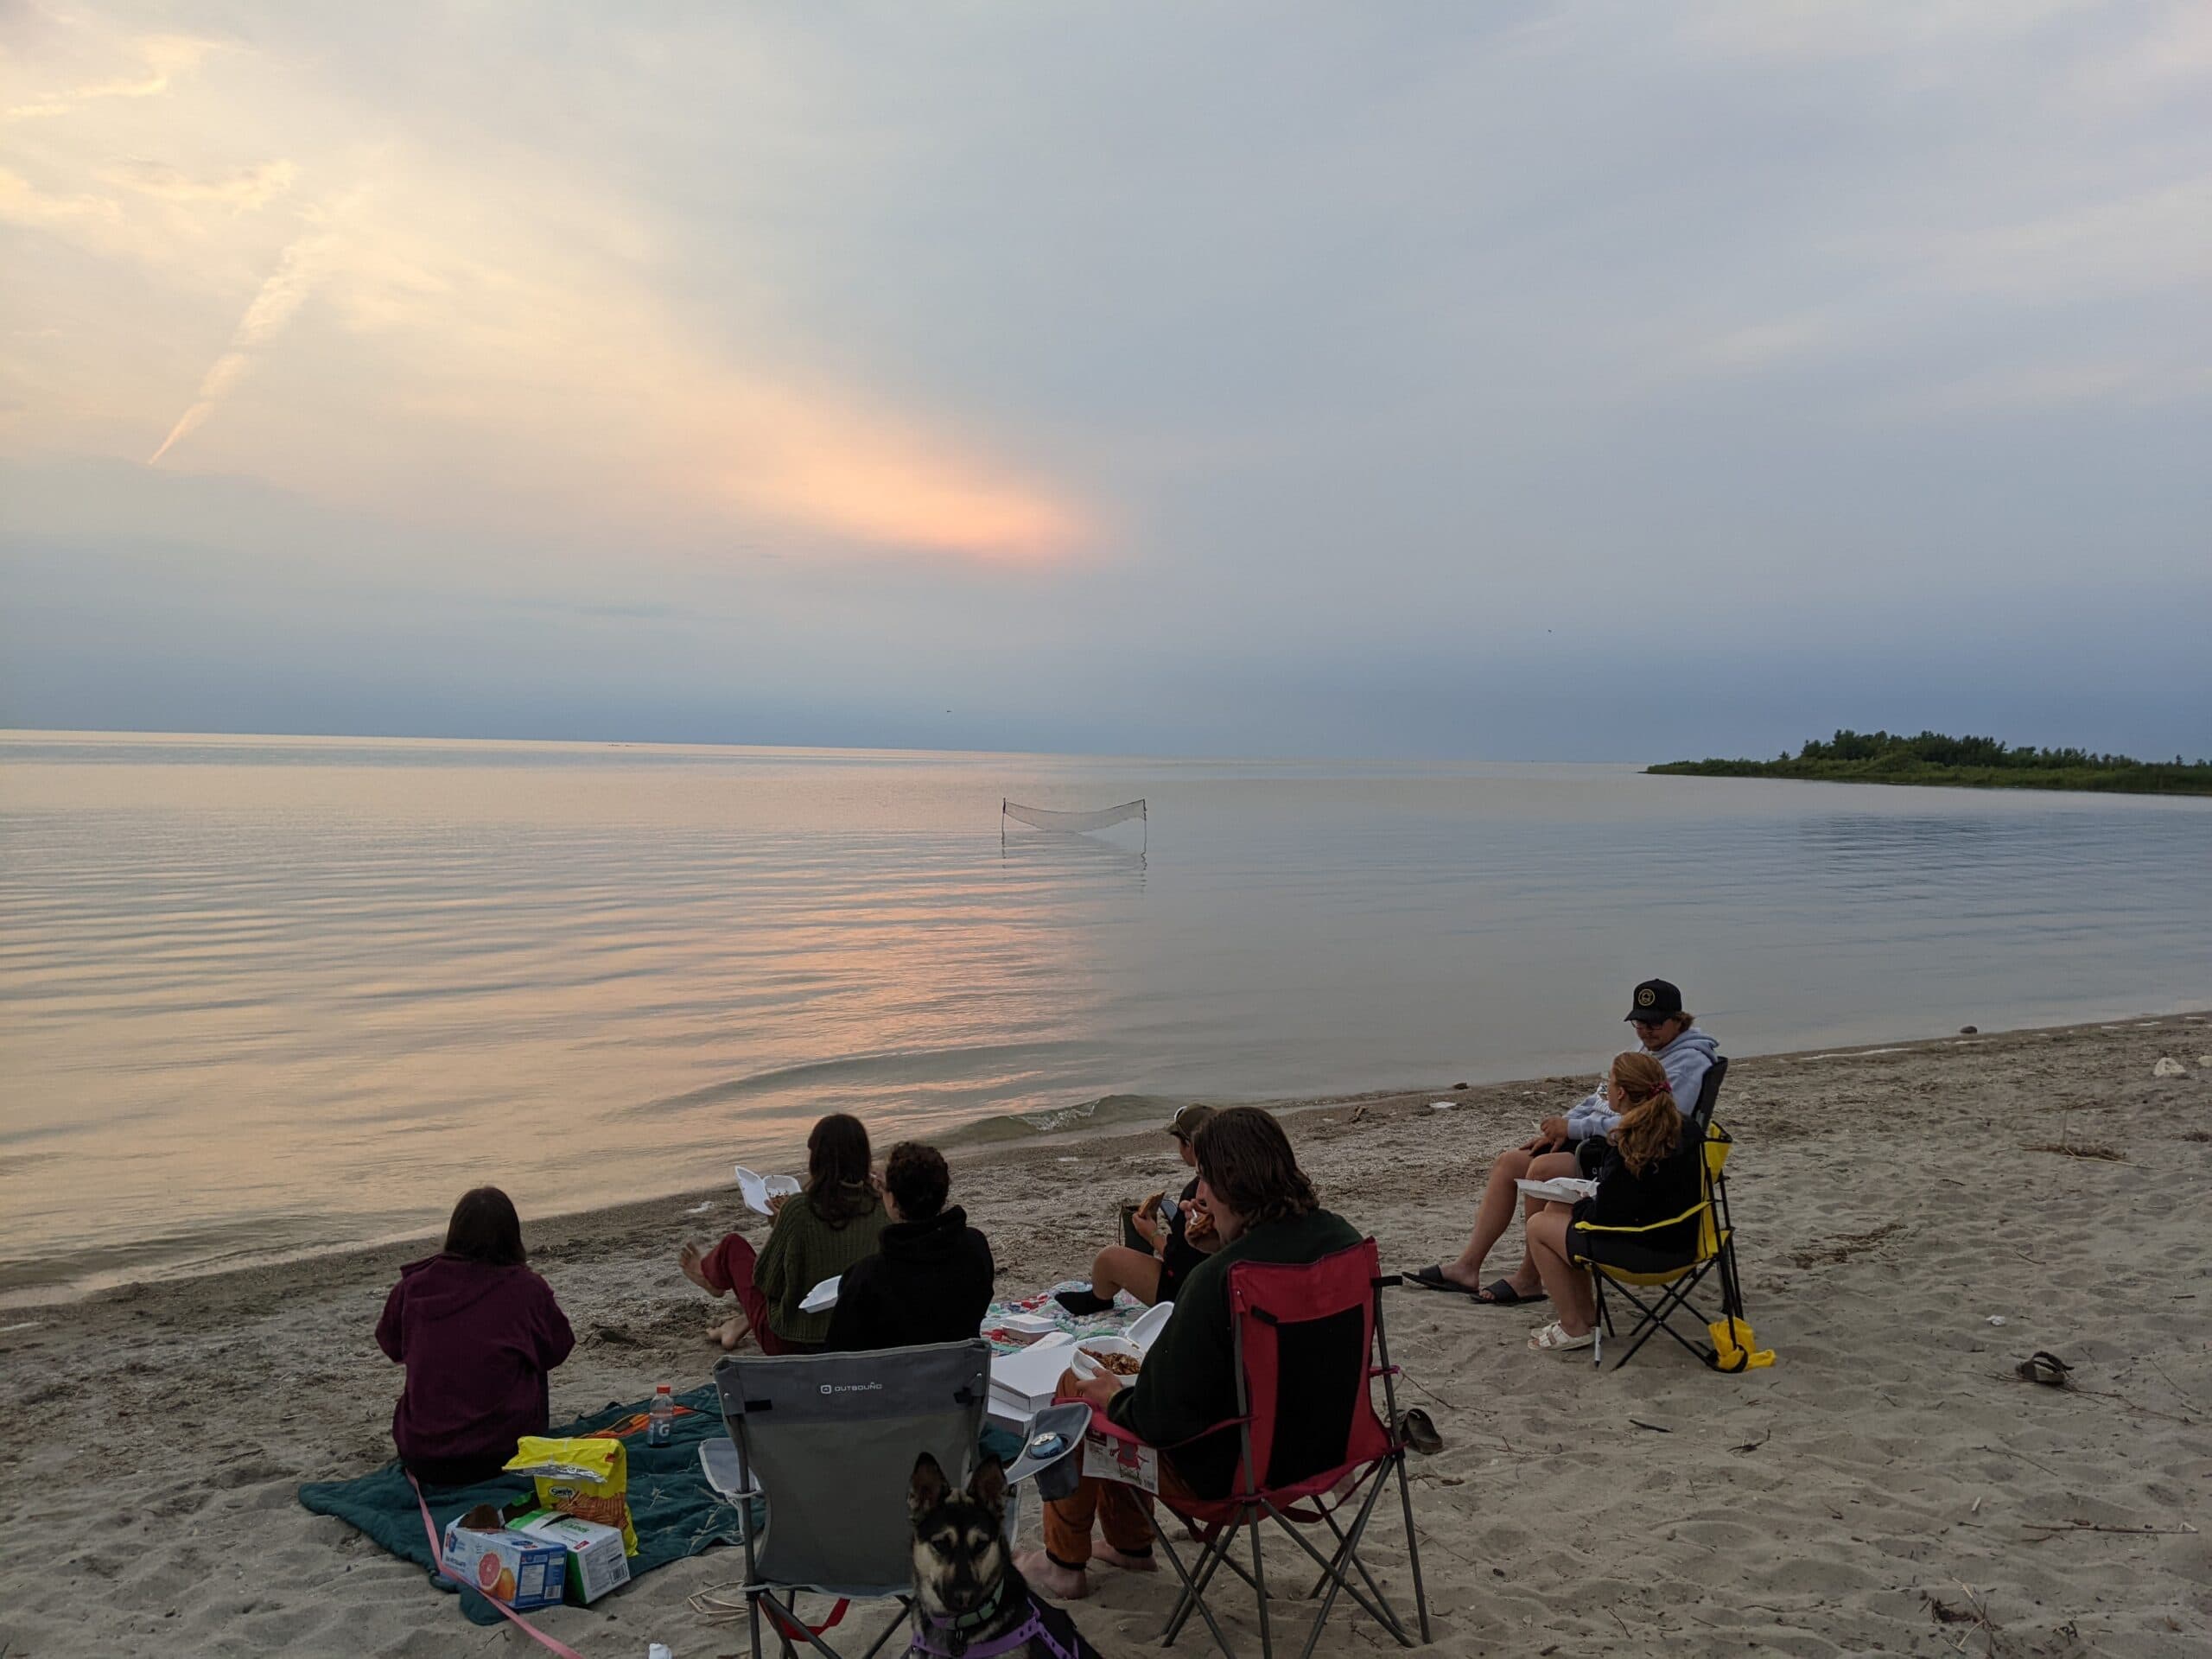 Metis youth sitting together and eating on the beach